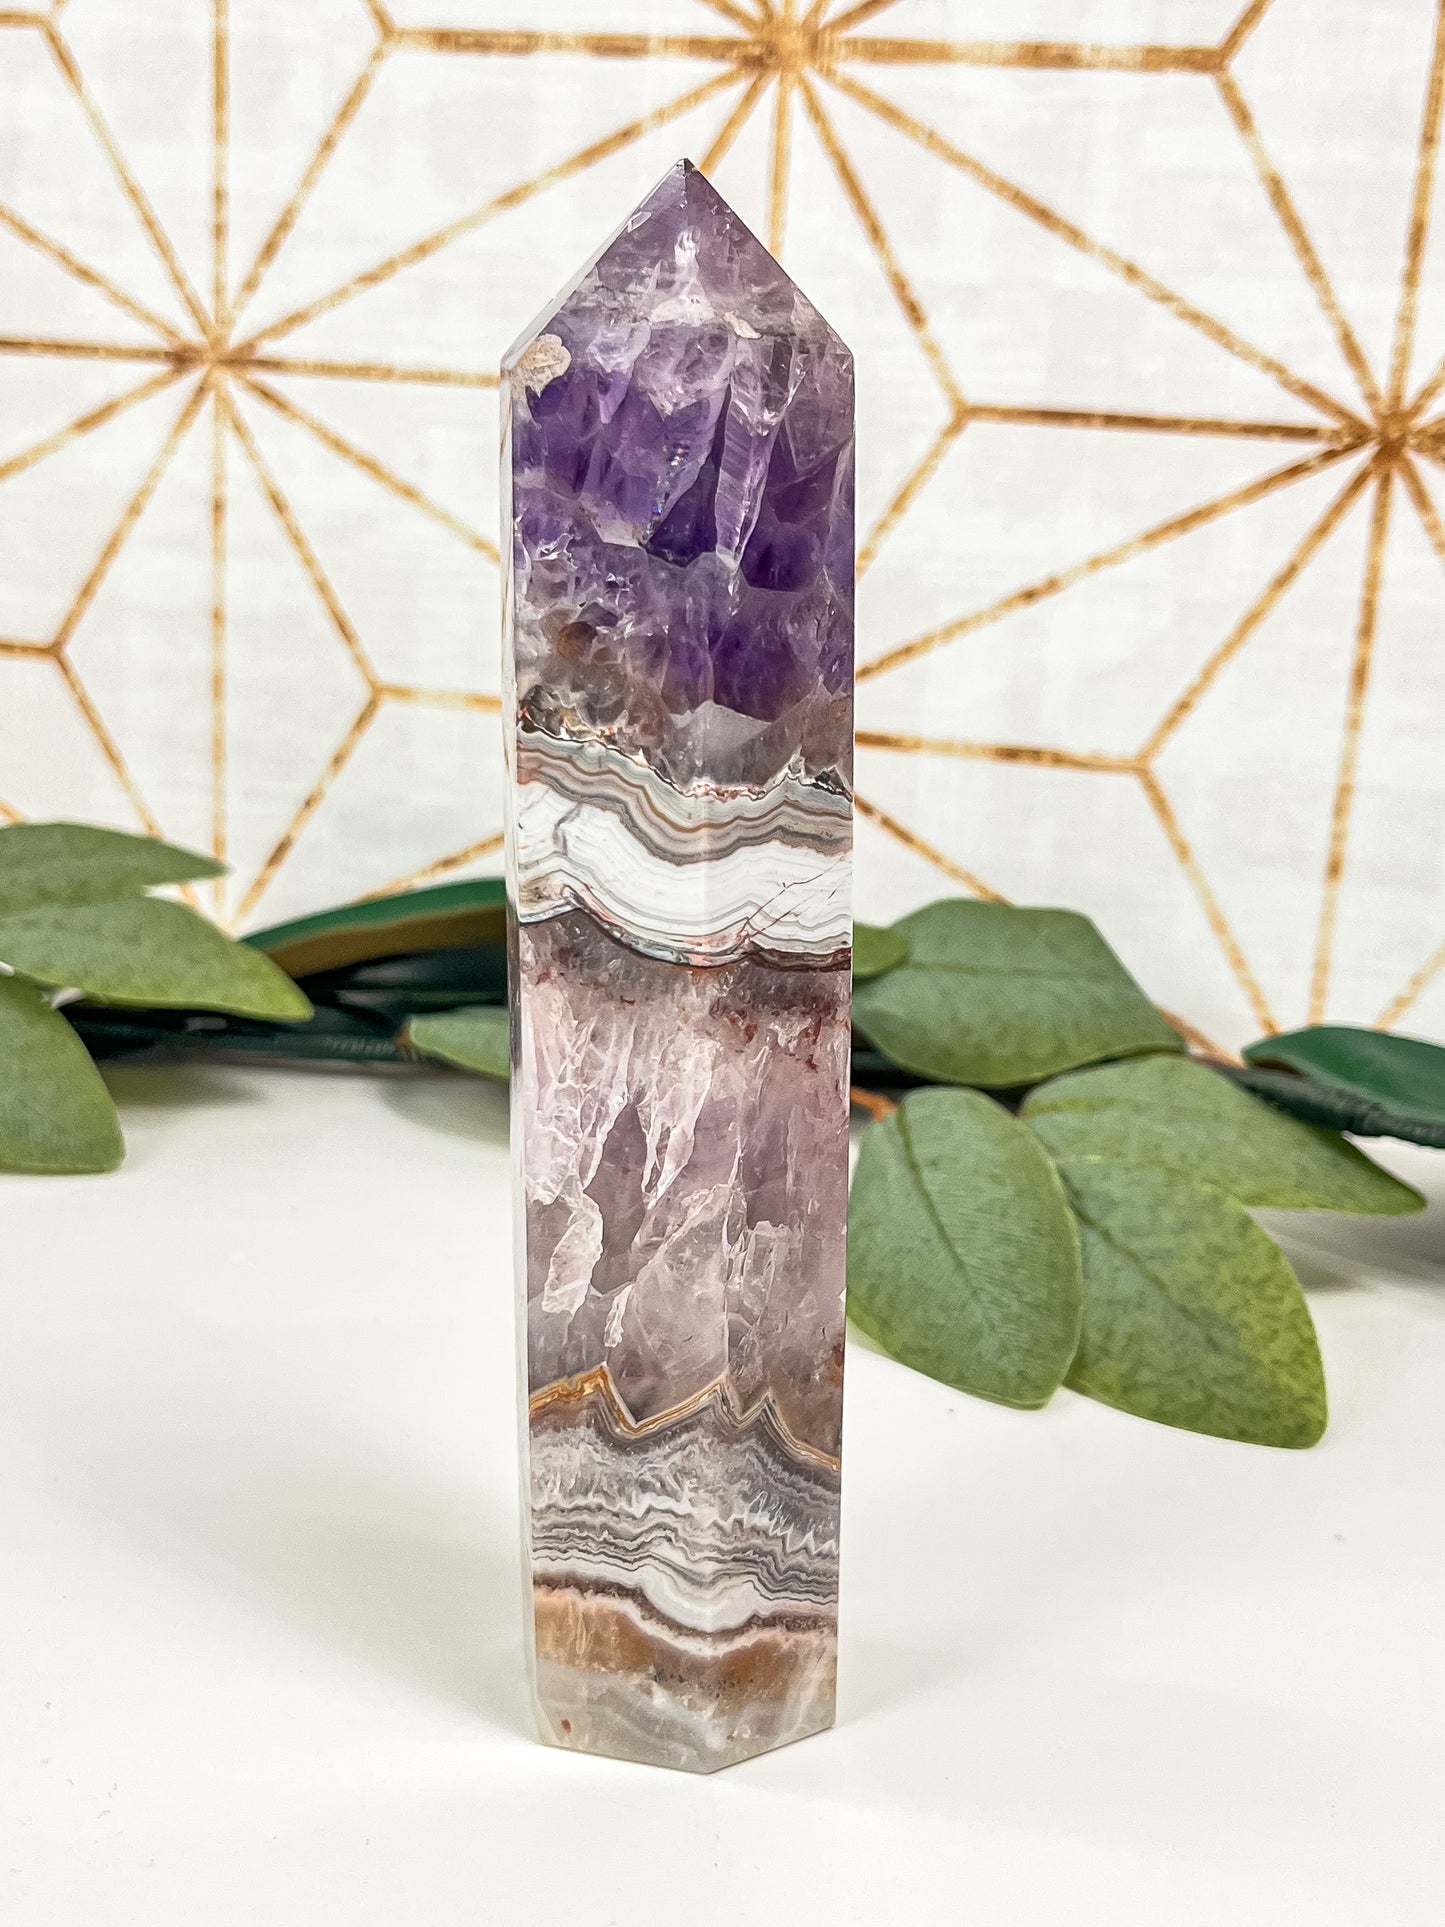 Amethyst and Crazy Lace Tower